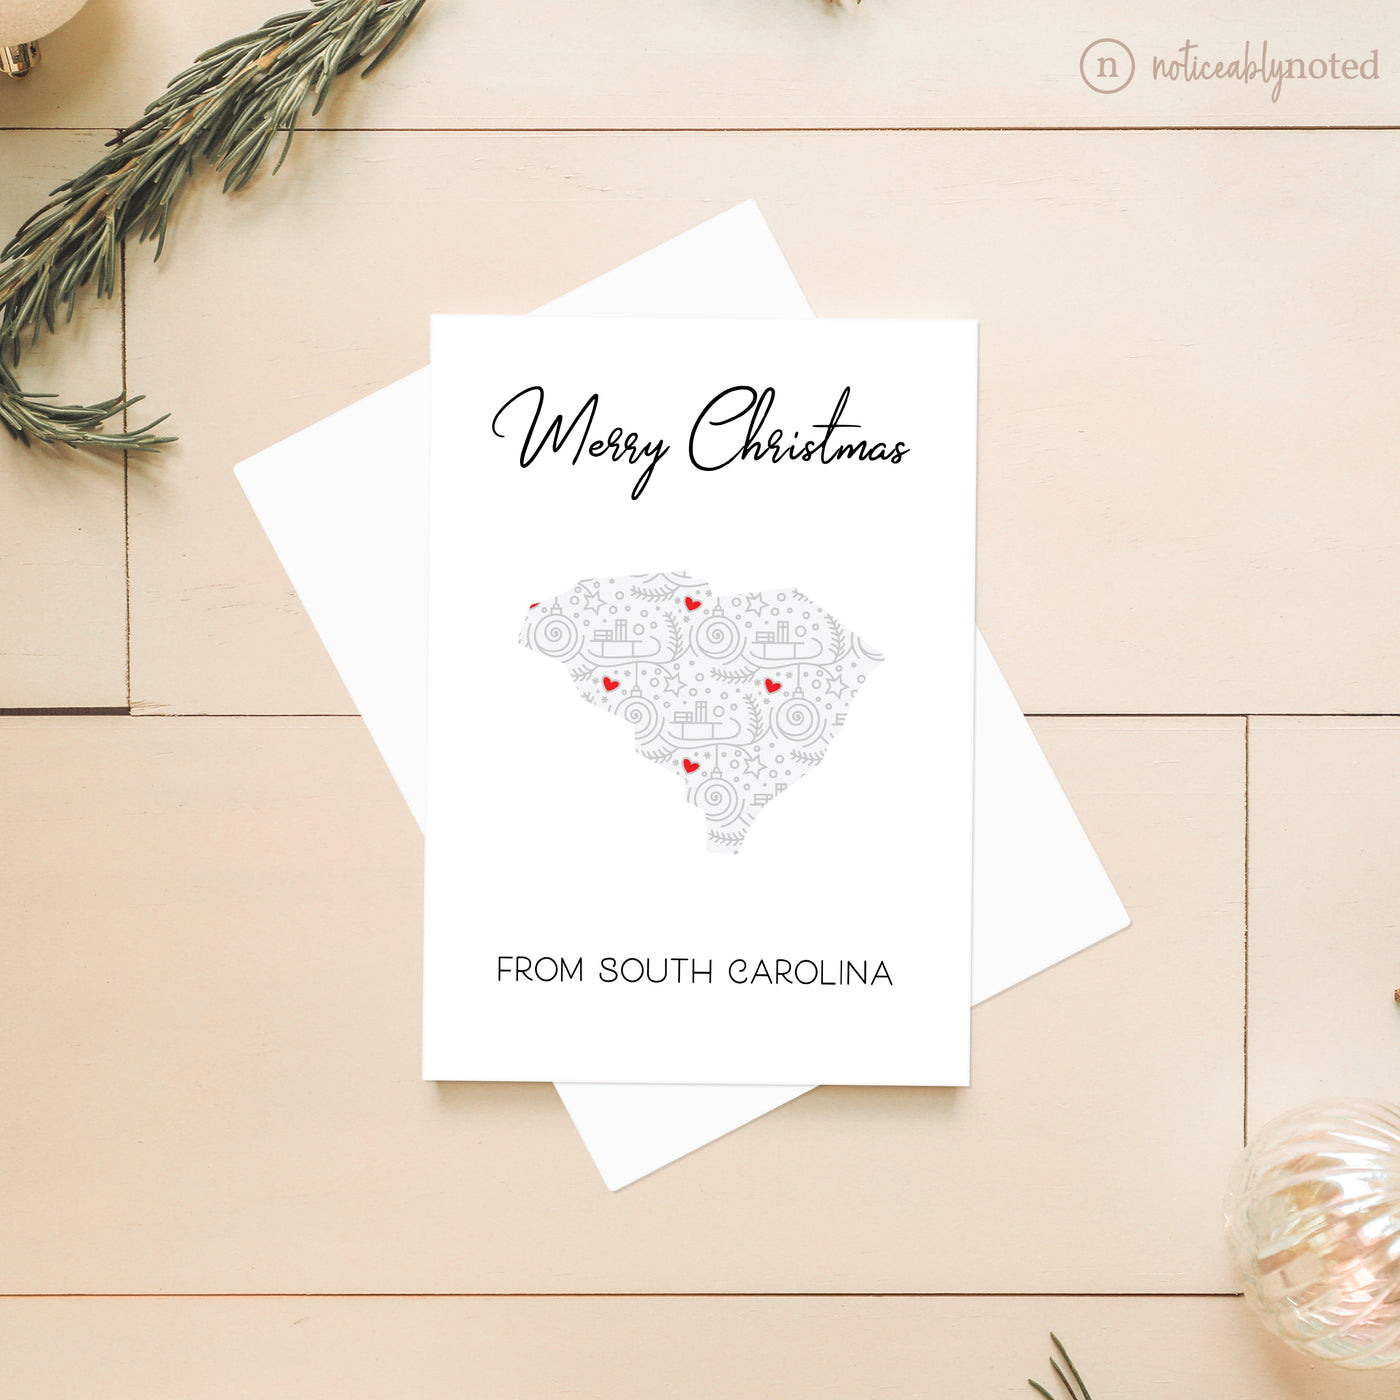 South Carolina Christmas Cards | Noticeably Noted